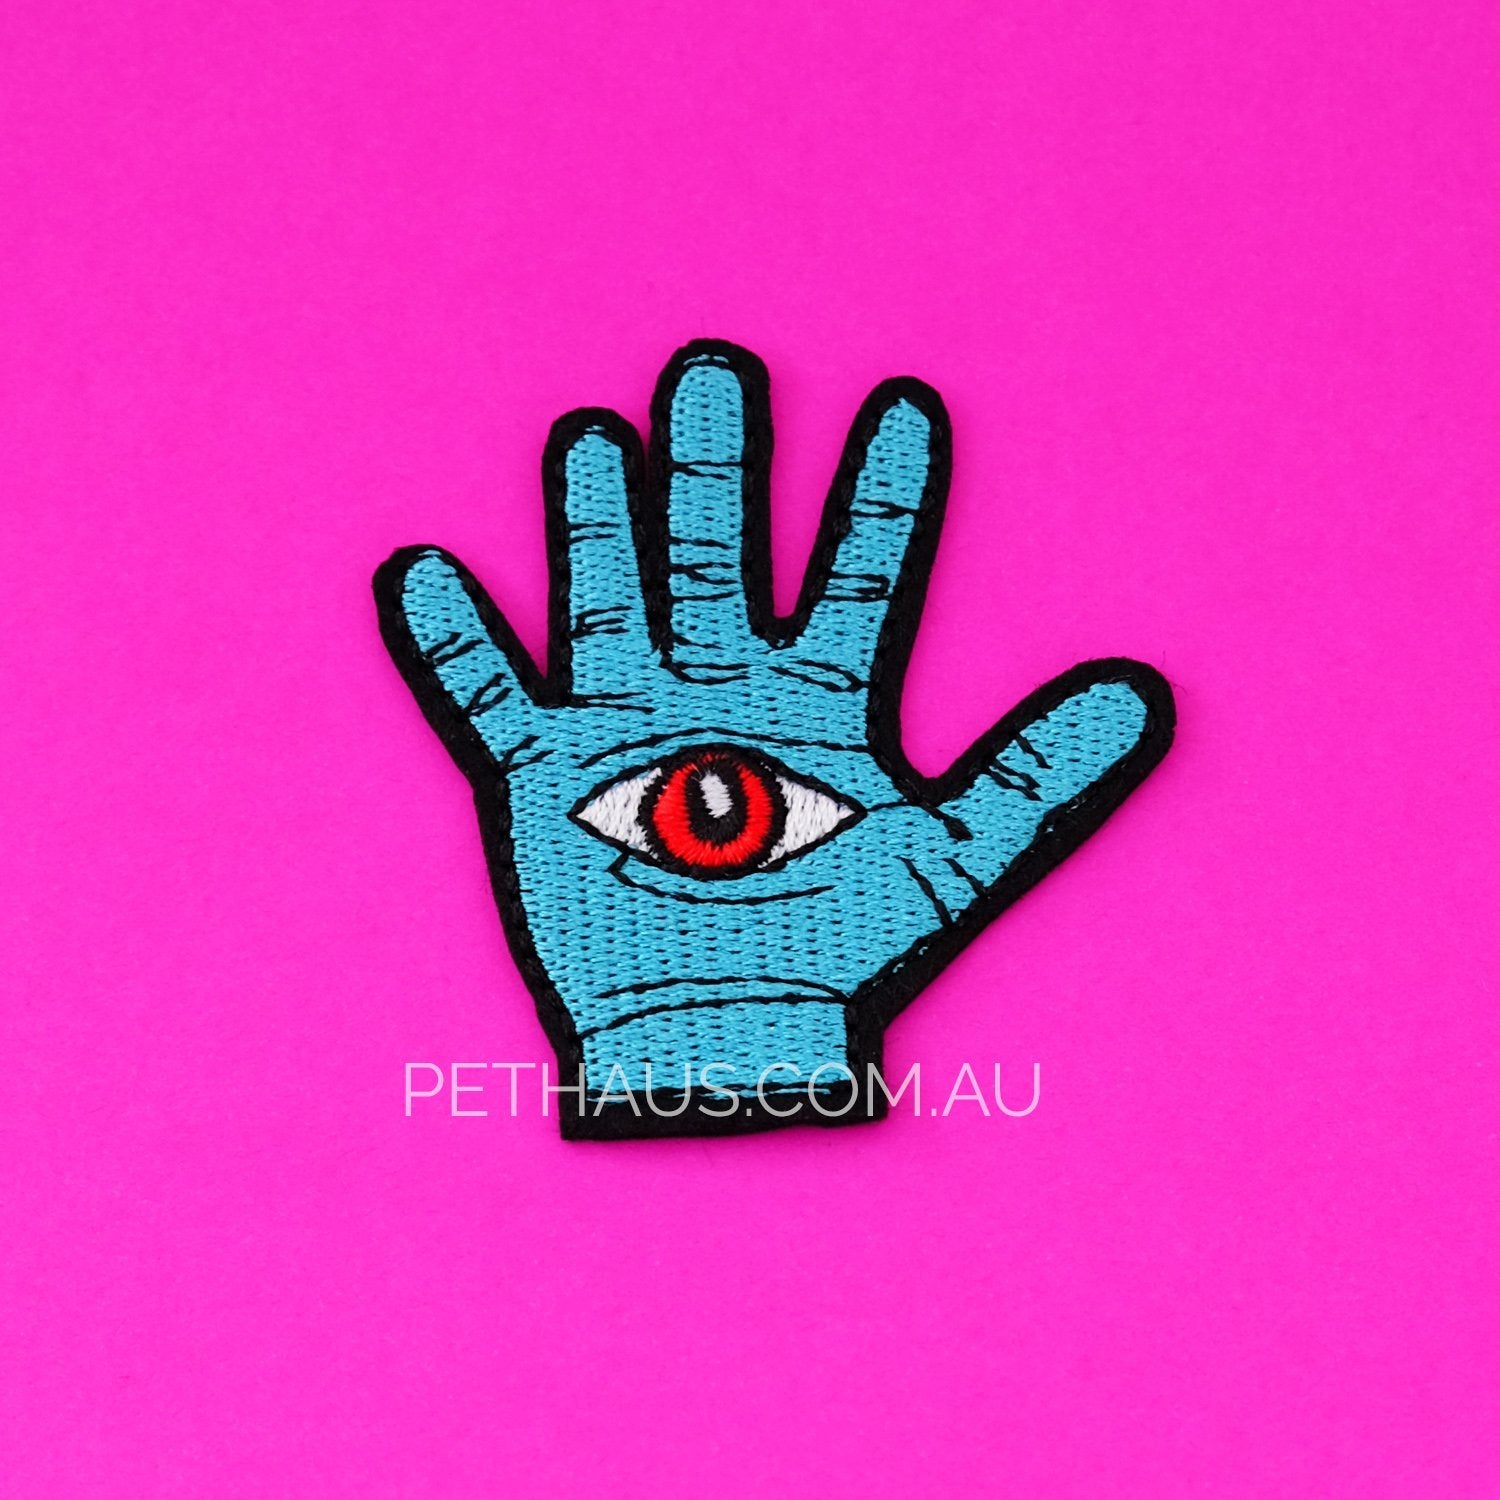 Blue hand embroidered patch, cool embroidered patch, occult patch 